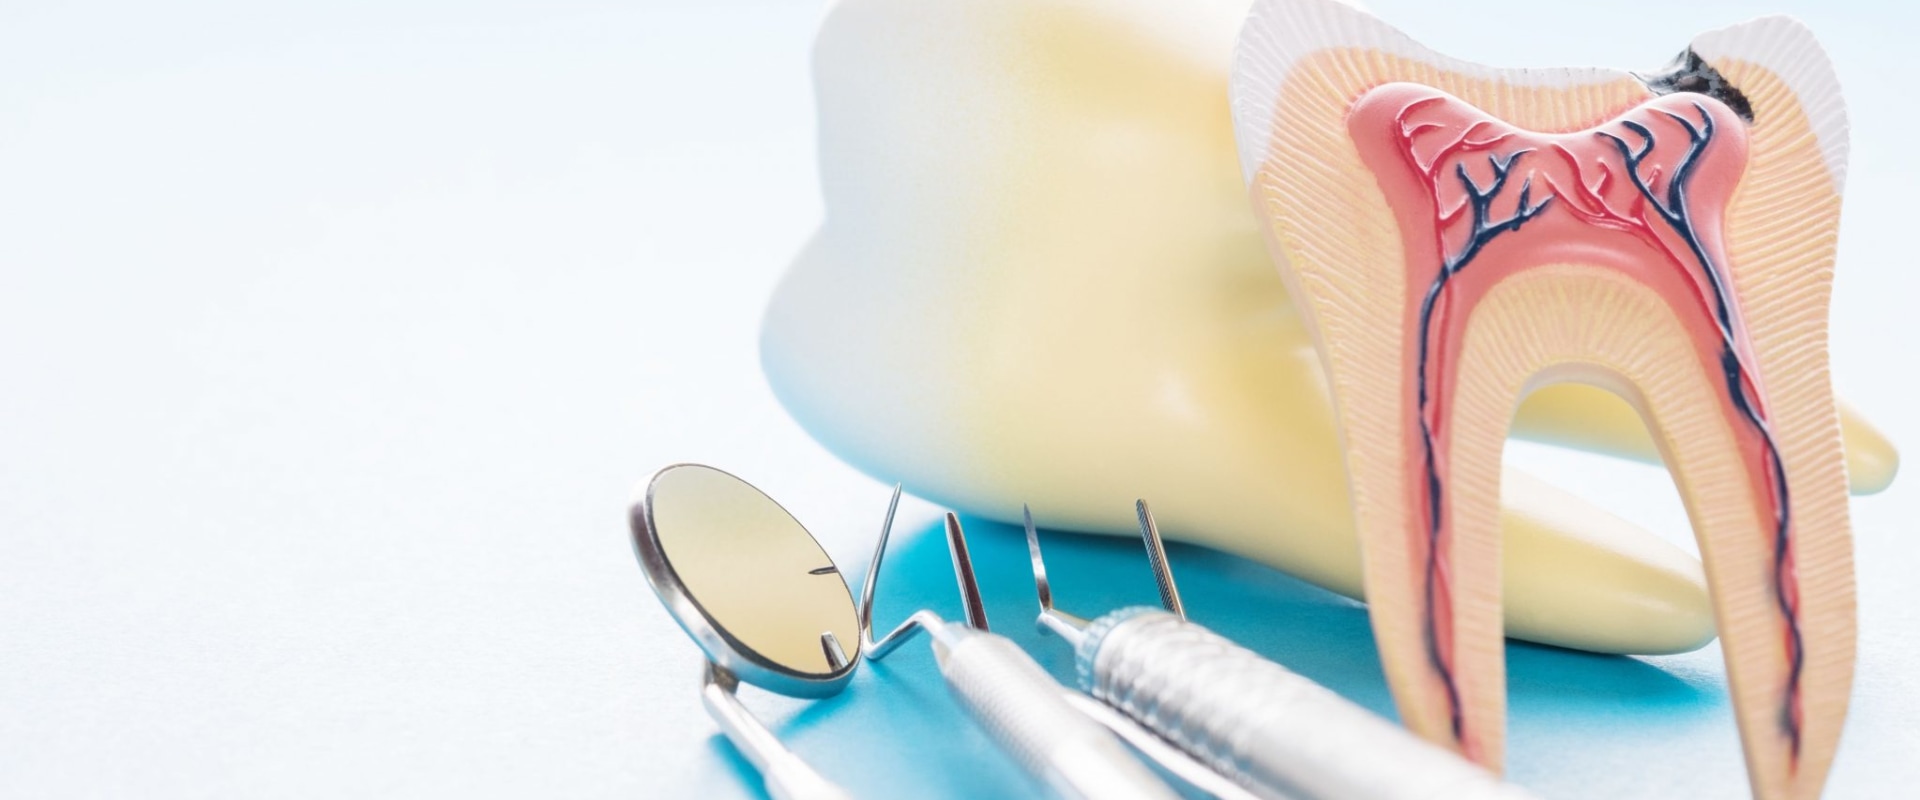 Do Endodontists Place Crowns After Root Canal Treatment?